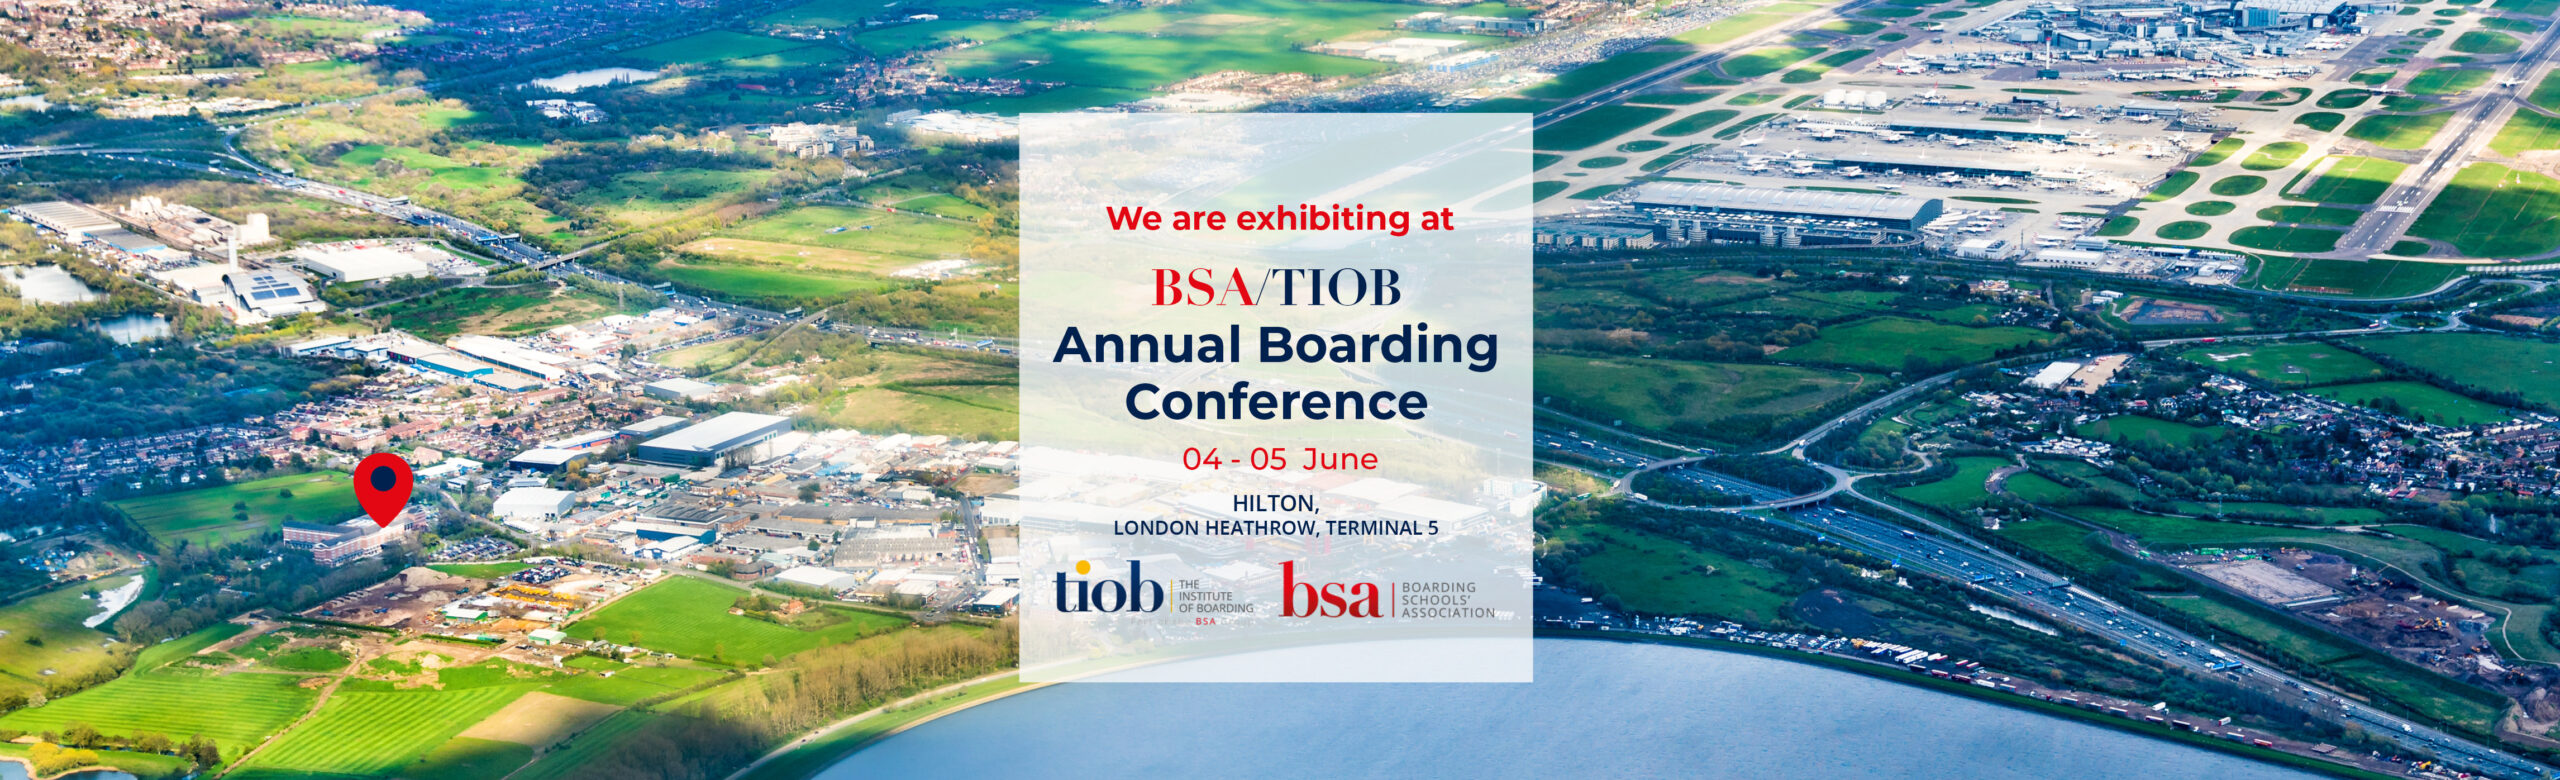 BSA Annual Boarding Conference